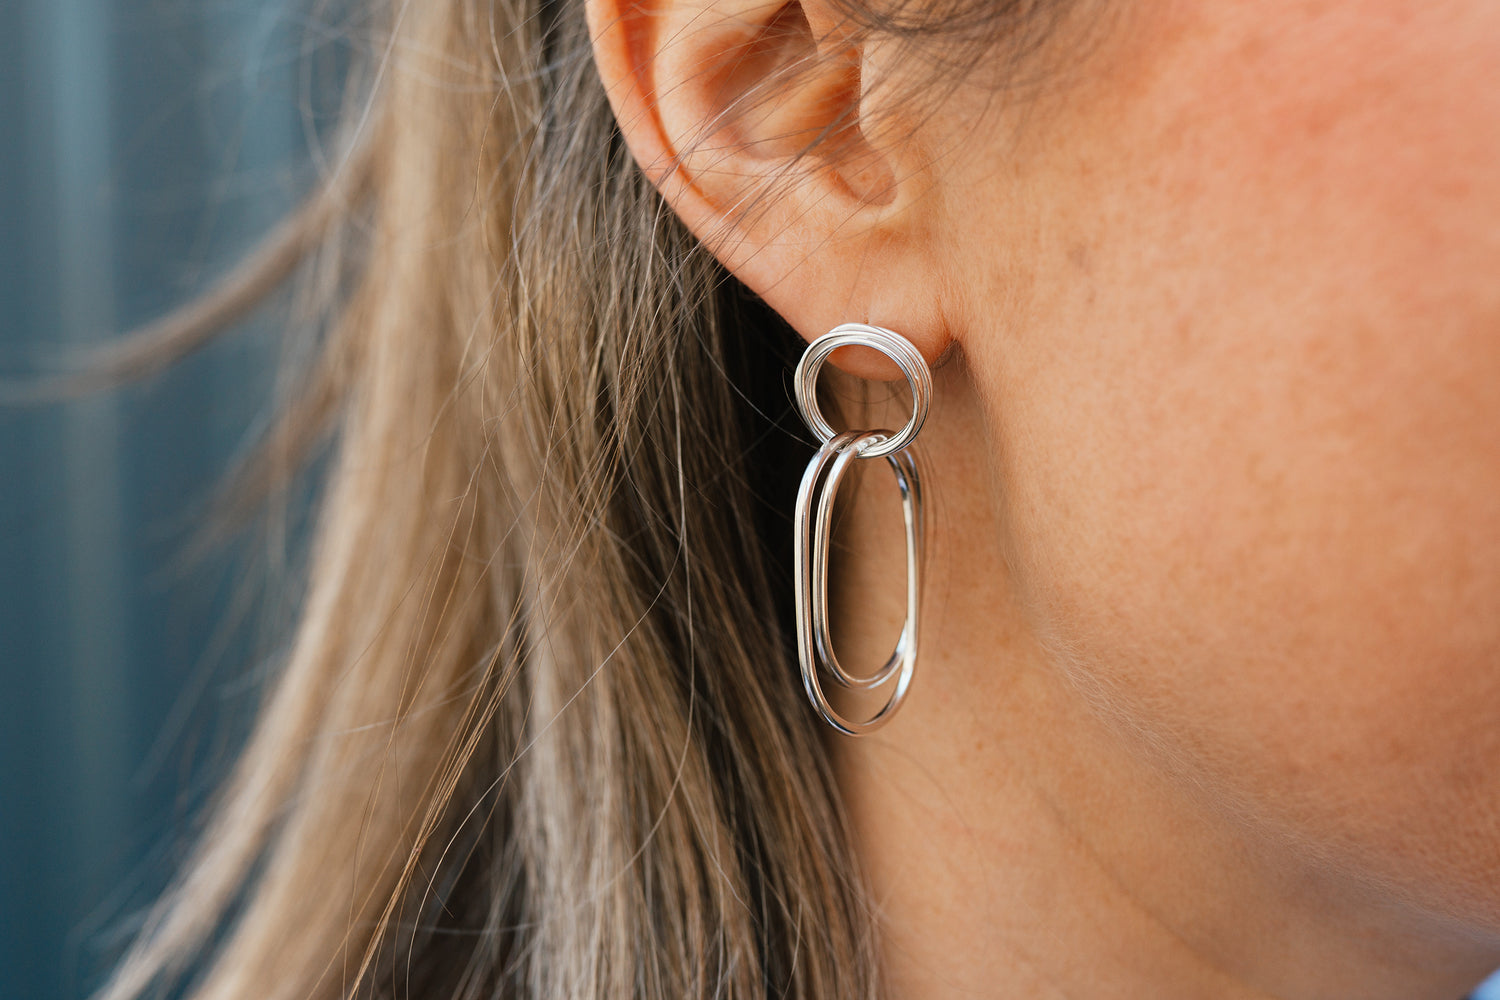 Melissa Gillespie Jewellery wearing a pair of Sterling Silver Stud Dangle Earrings Contemporary in style, handmade from her studio in Adelaide, South Australia